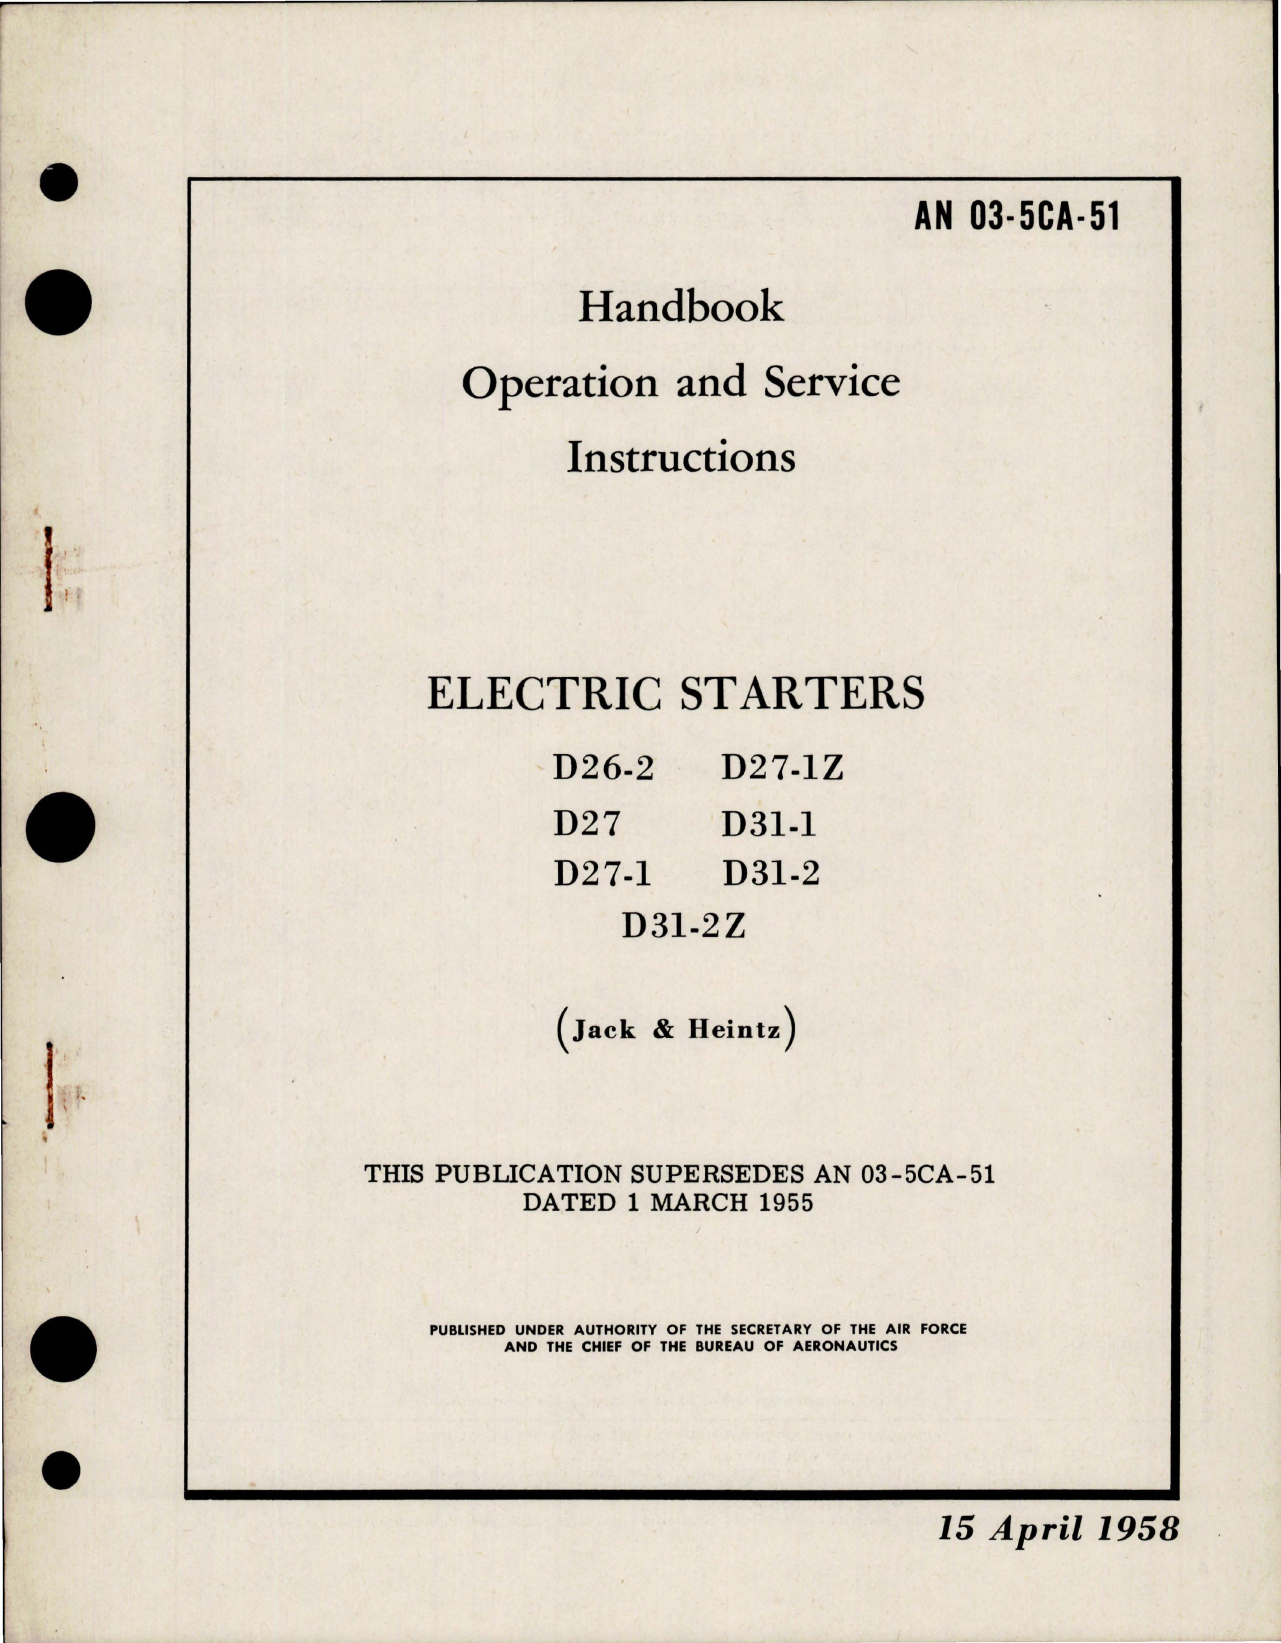 Sample page 1 from AirCorps Library document: Operation and Service Instructions for Electric Starters - D26-2, D27, D27-1, D27-1Z, D31-1, D31-2 and D31-2Z